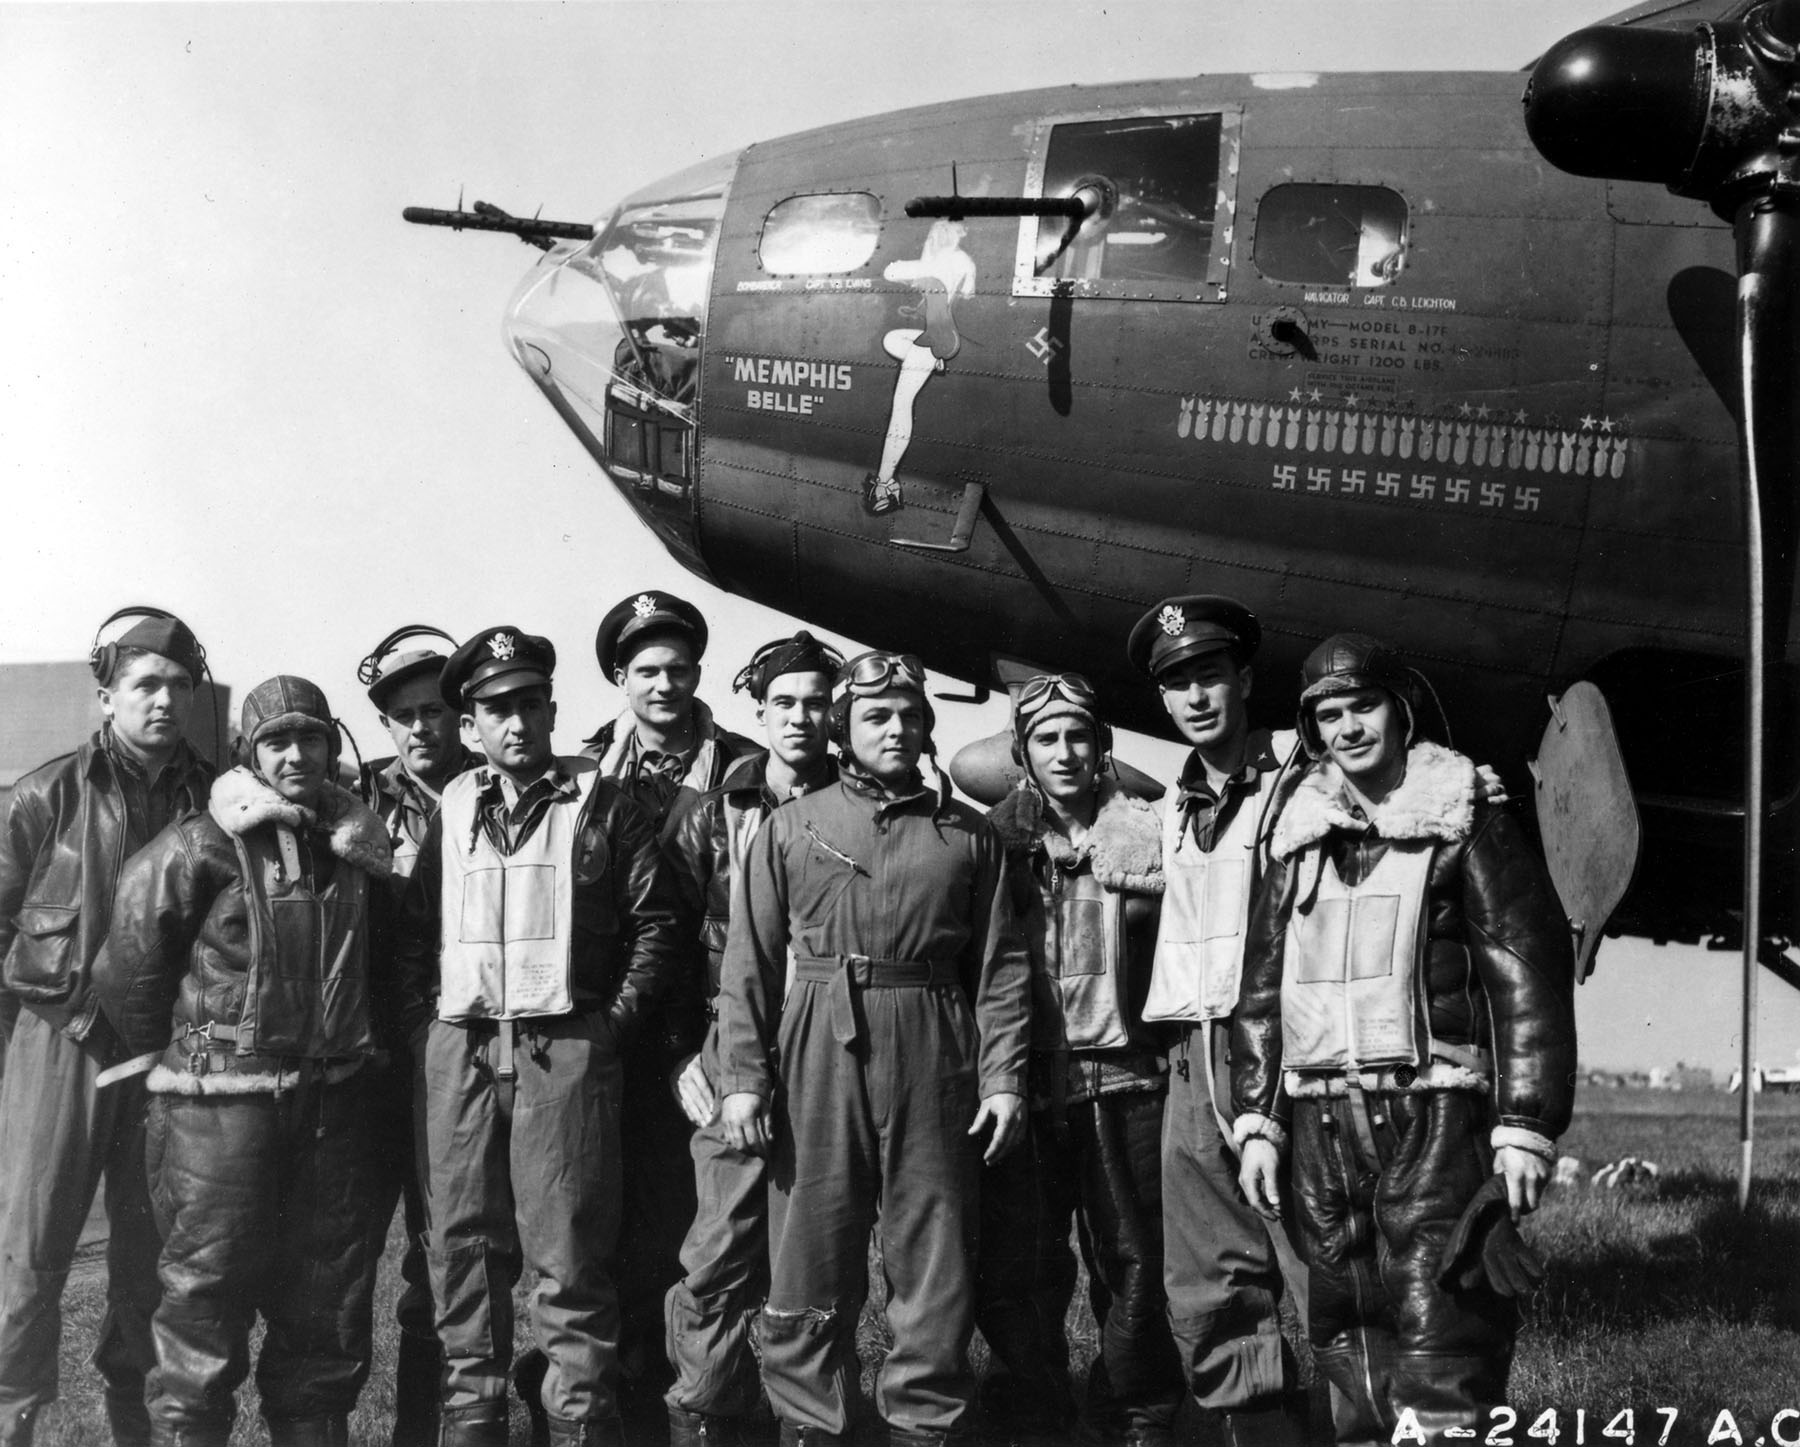 B-17 Memphis Belle and her crew, May 1943 (USAF Photo)